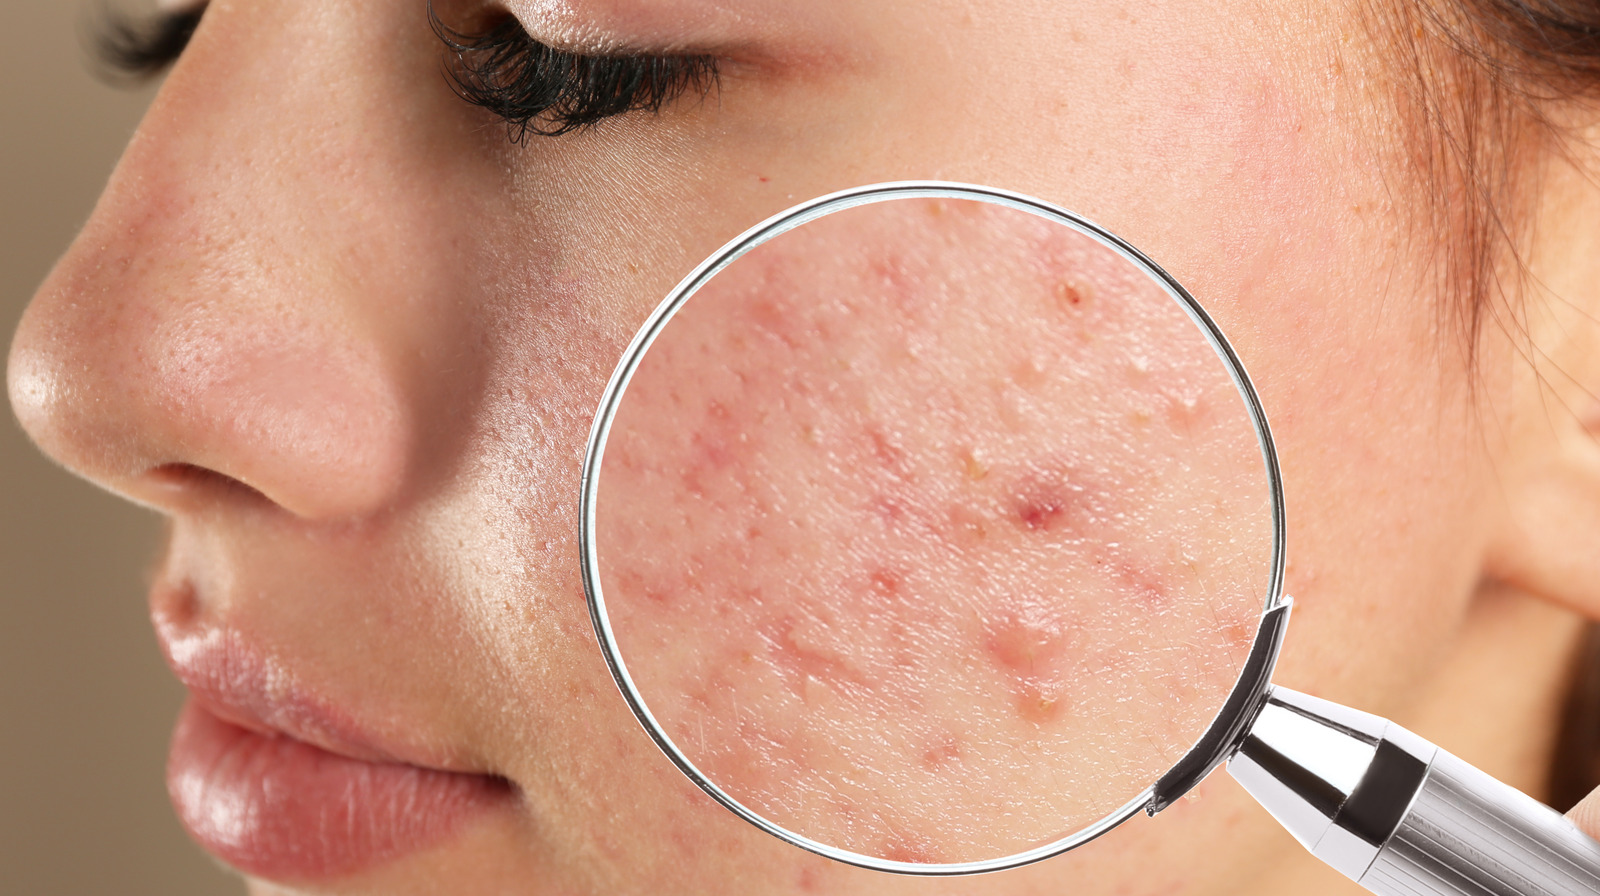 Acne Scars And Dark Spots: What Are They And How Do You Get Rid Of Them?